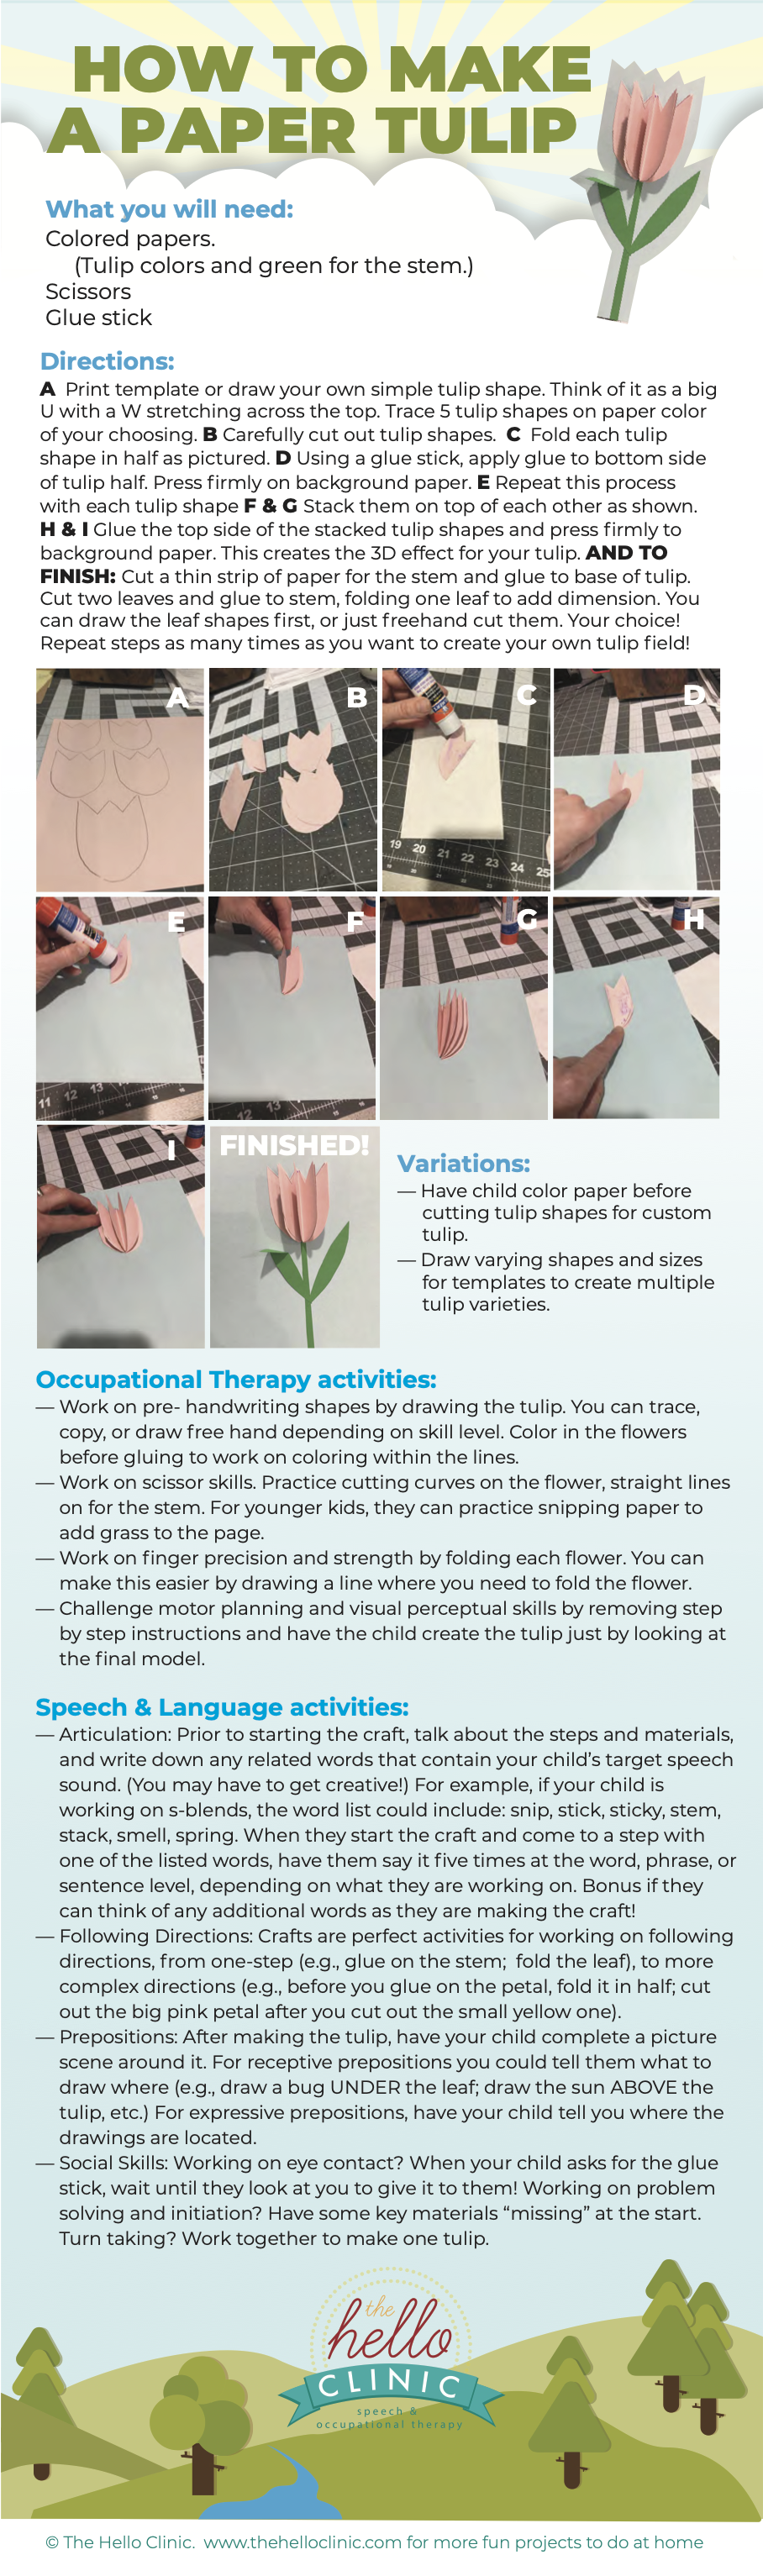 small image of how to make a paper tulip 